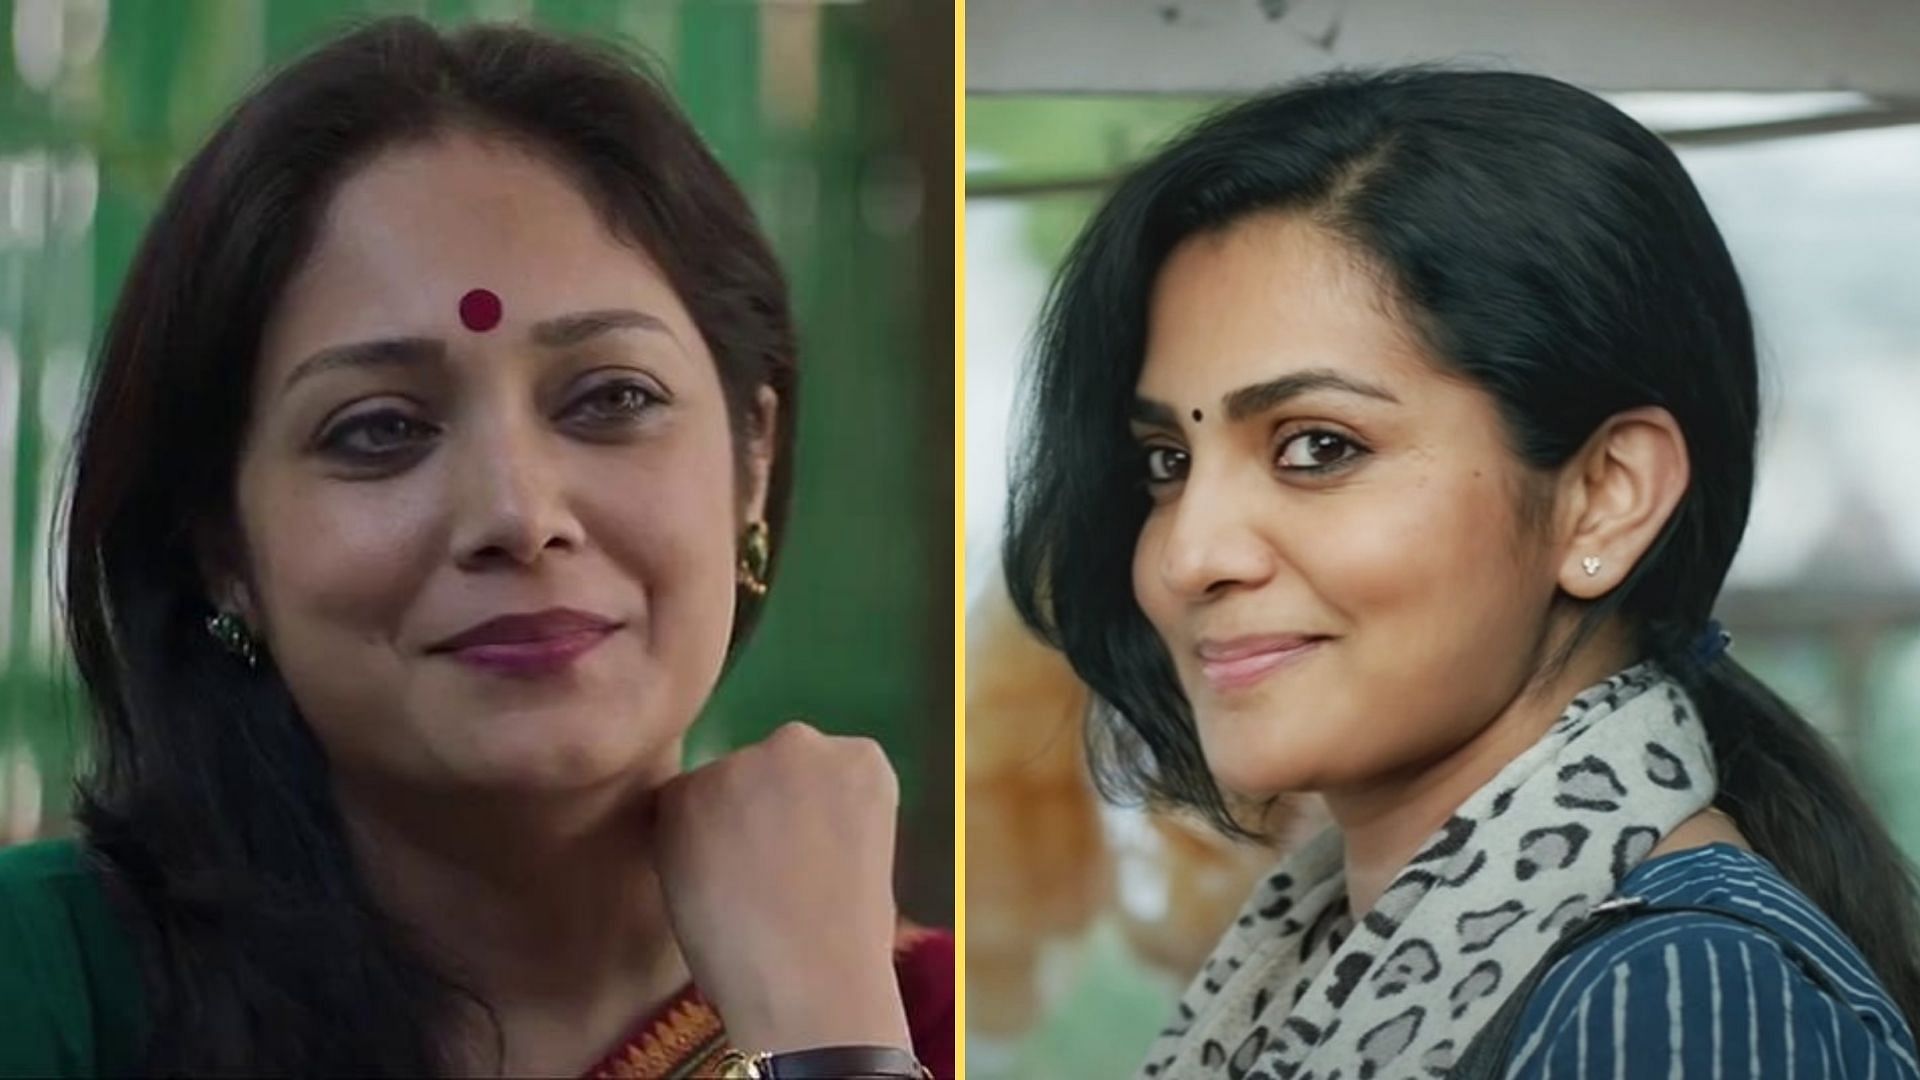 Lima Das in <i>Aamis</i> and Parvathy in <i>Uyare</i>.